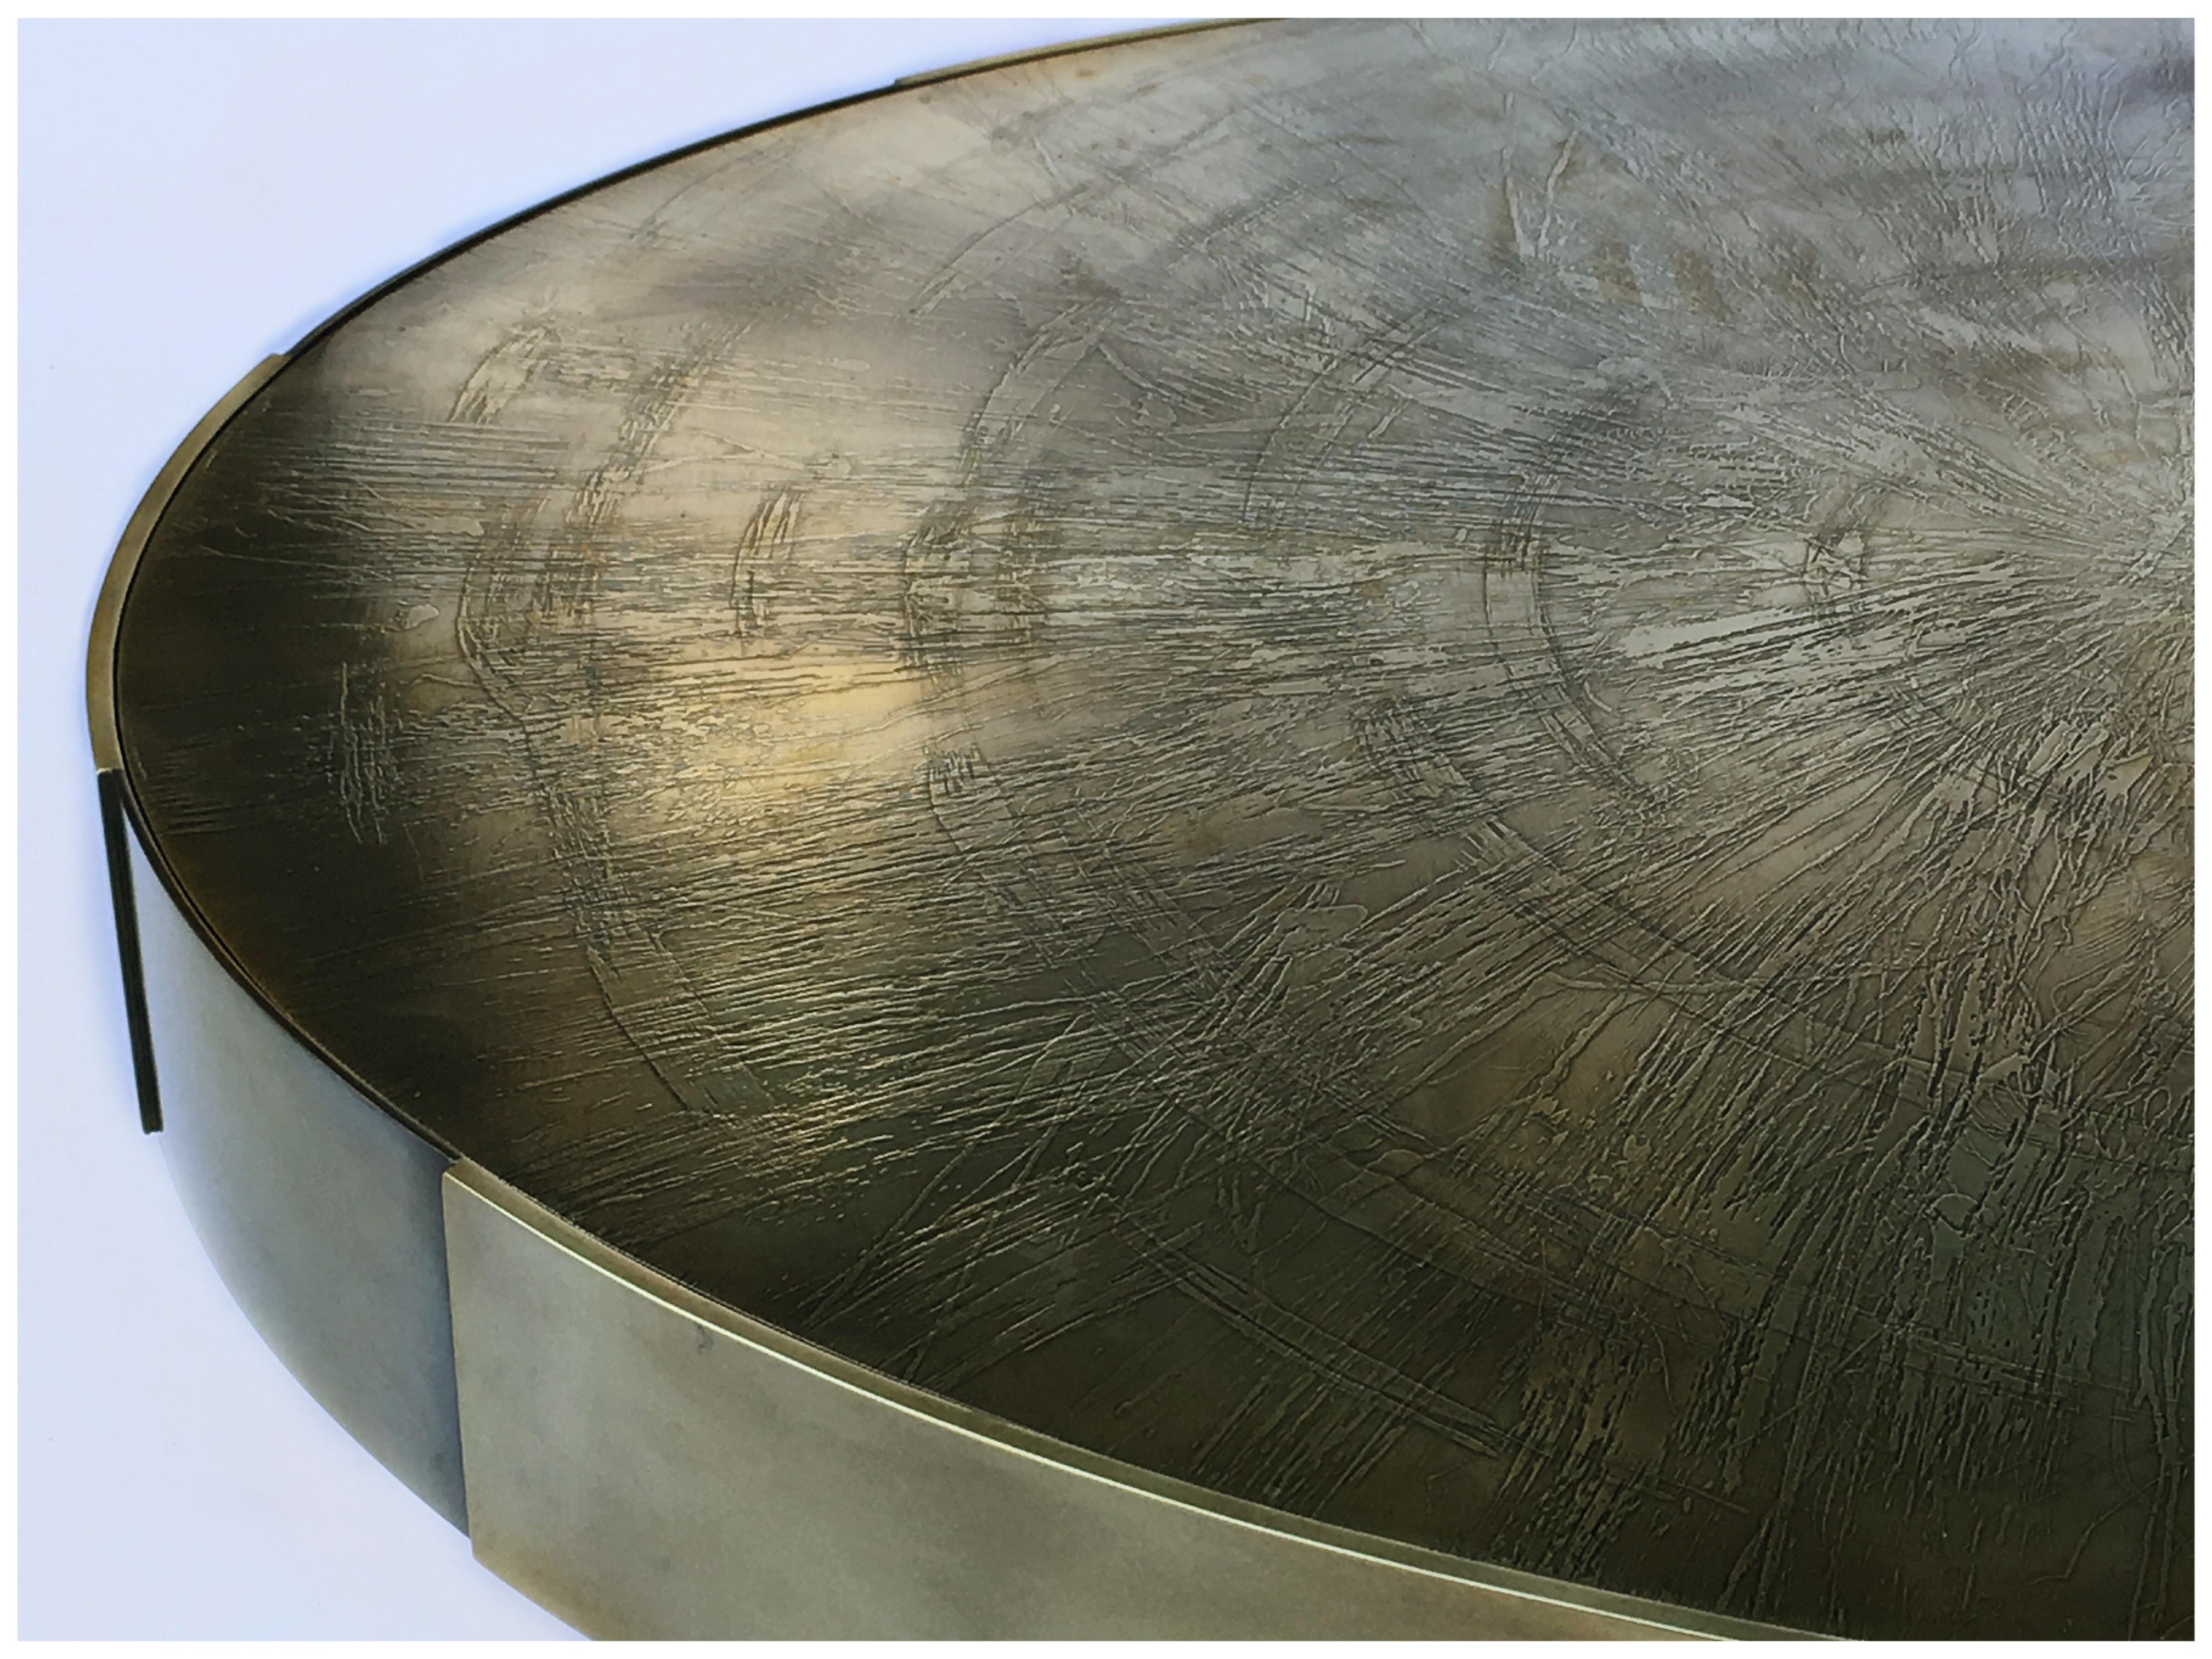 Phaux brass coffee table, Signed by Stefan Leo
Brass, etched, patinated 
Measures: D 120 circular, H 37cm
(Other dimensions, materials can be made to order)

Atelier Stefan Leo has a remarkable reputation thanks to its unique furniture designs